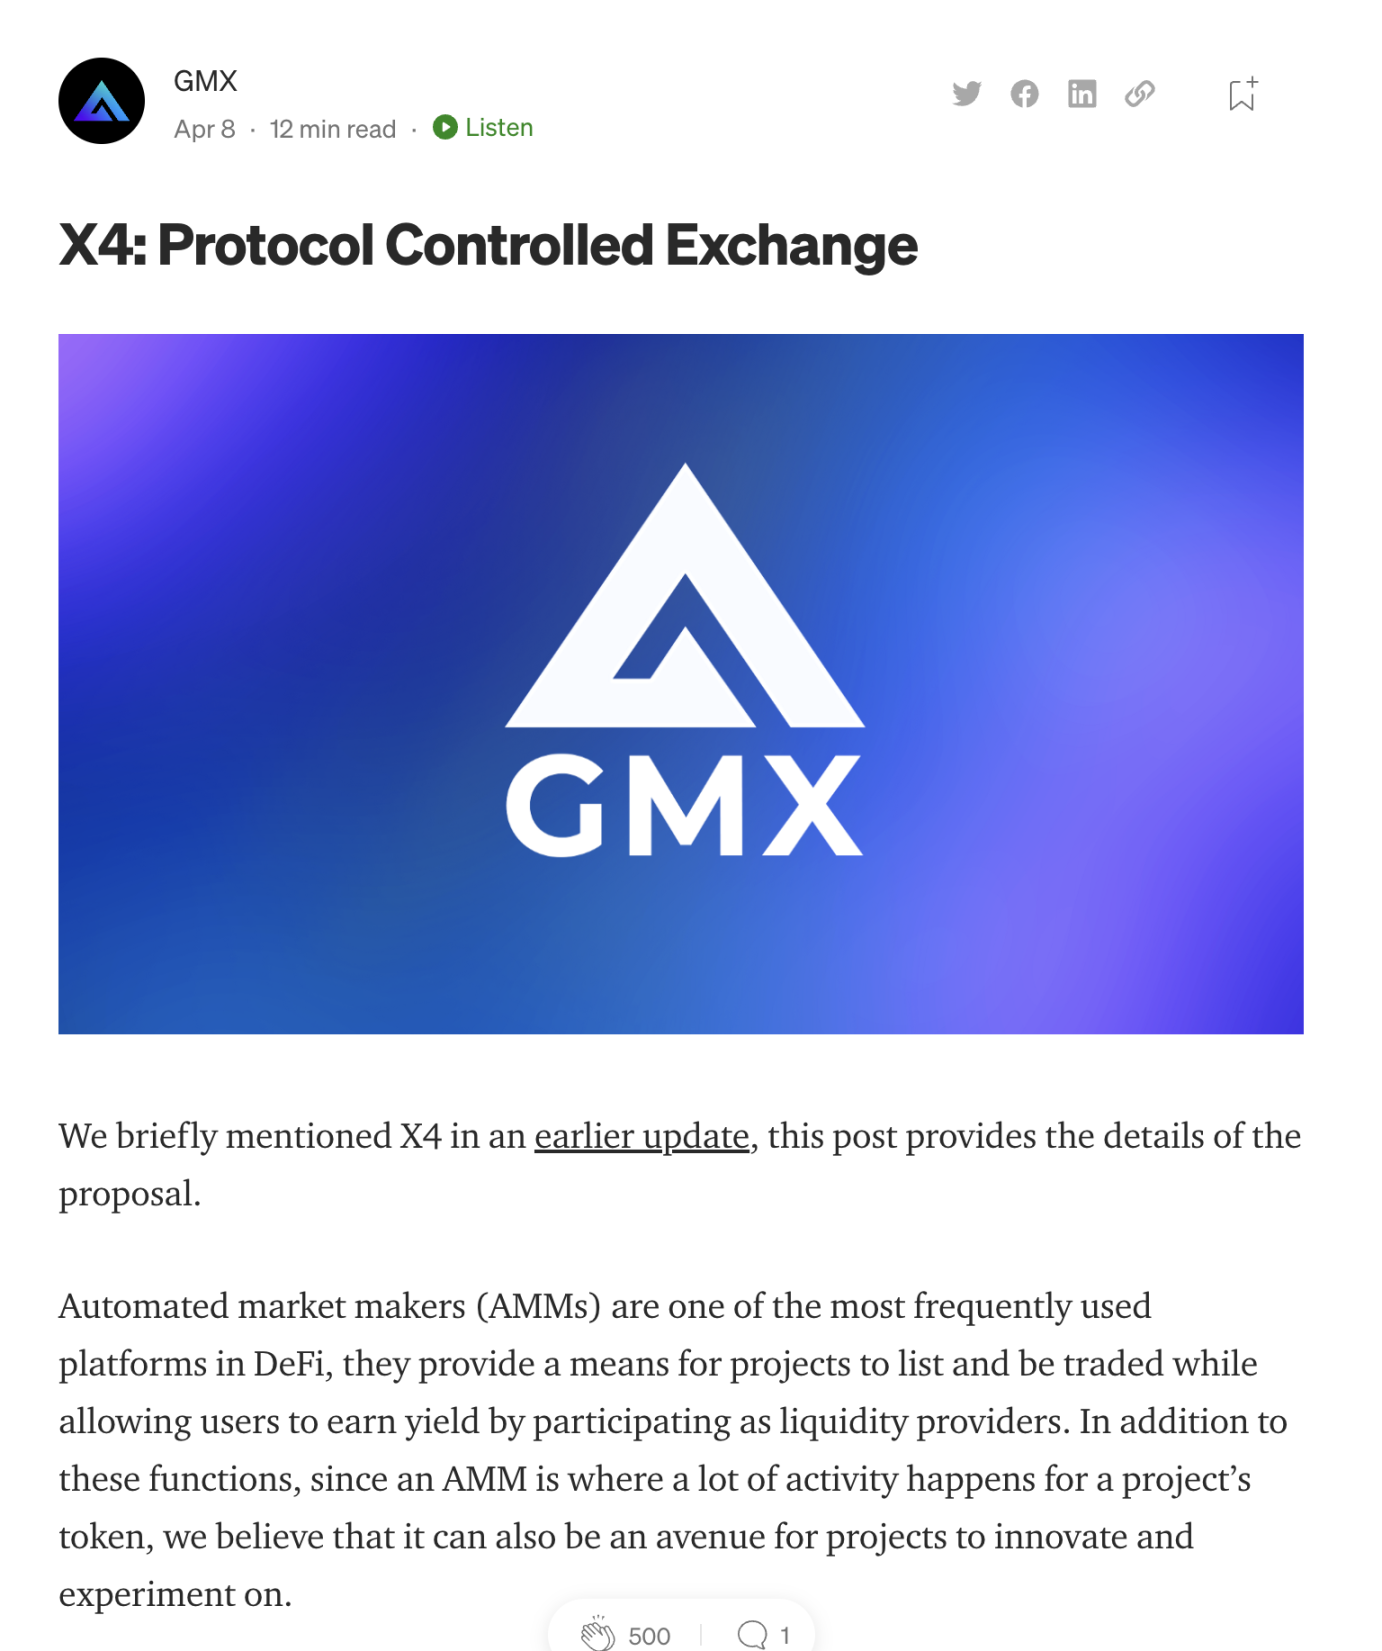 X4: Protocol Controlled Exchange